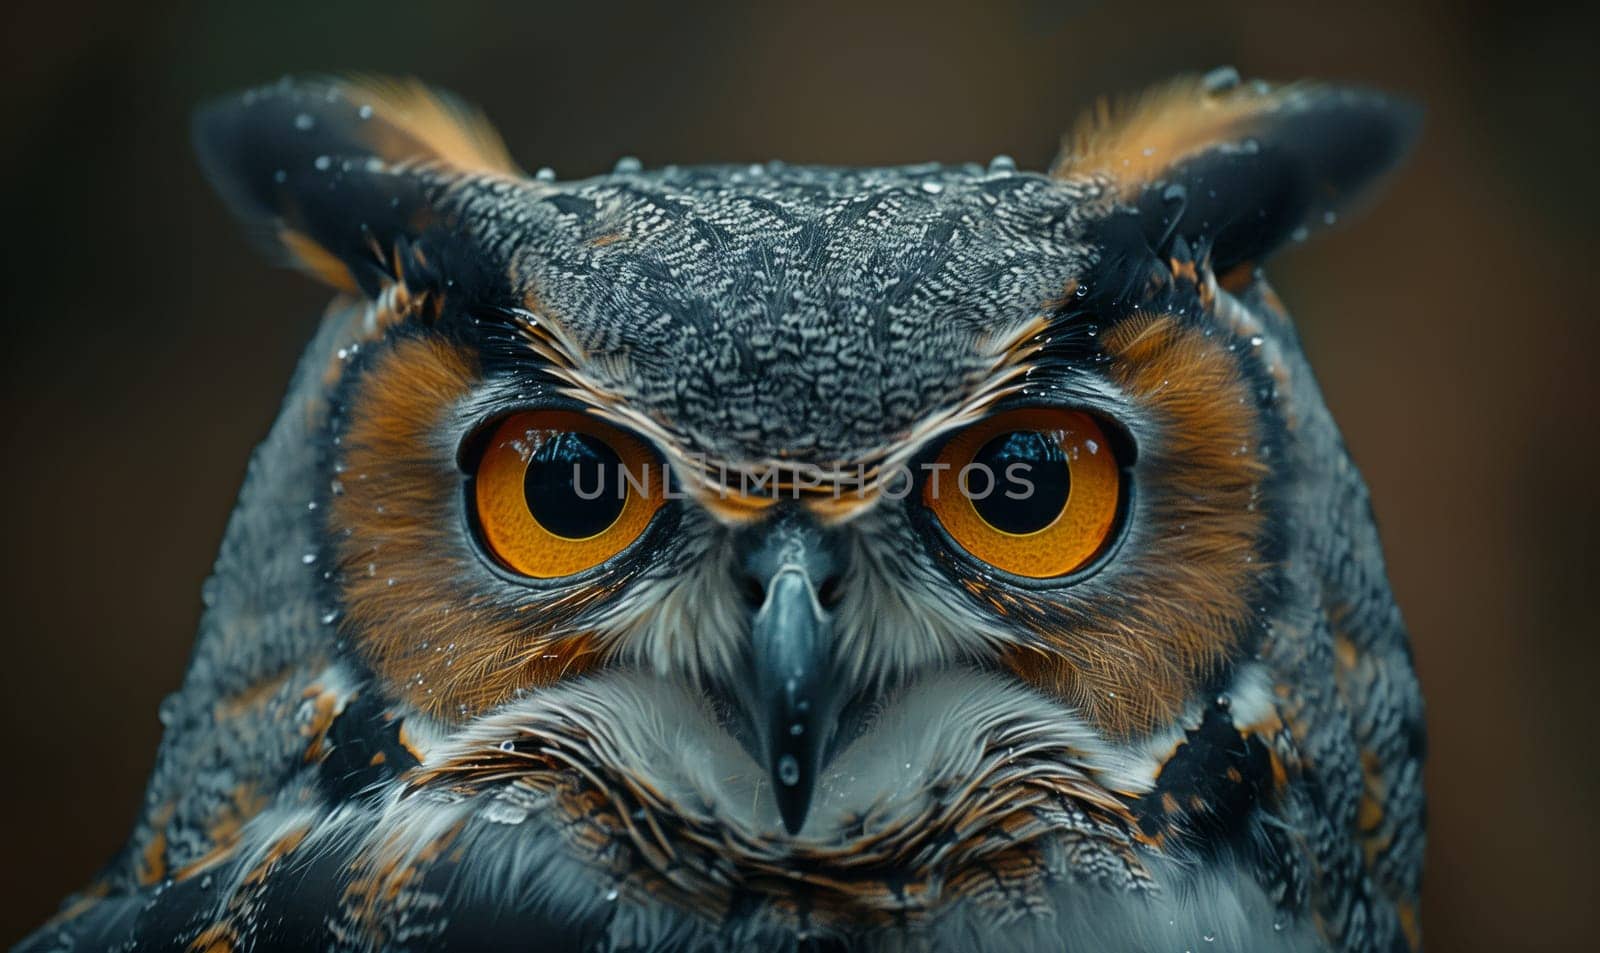 A closeup photograph of a great horned owls head with mesmerizing yellow eyes, prominent green feathers, and a sharp beak looking directly at the camera, showcasing the beauty of nature